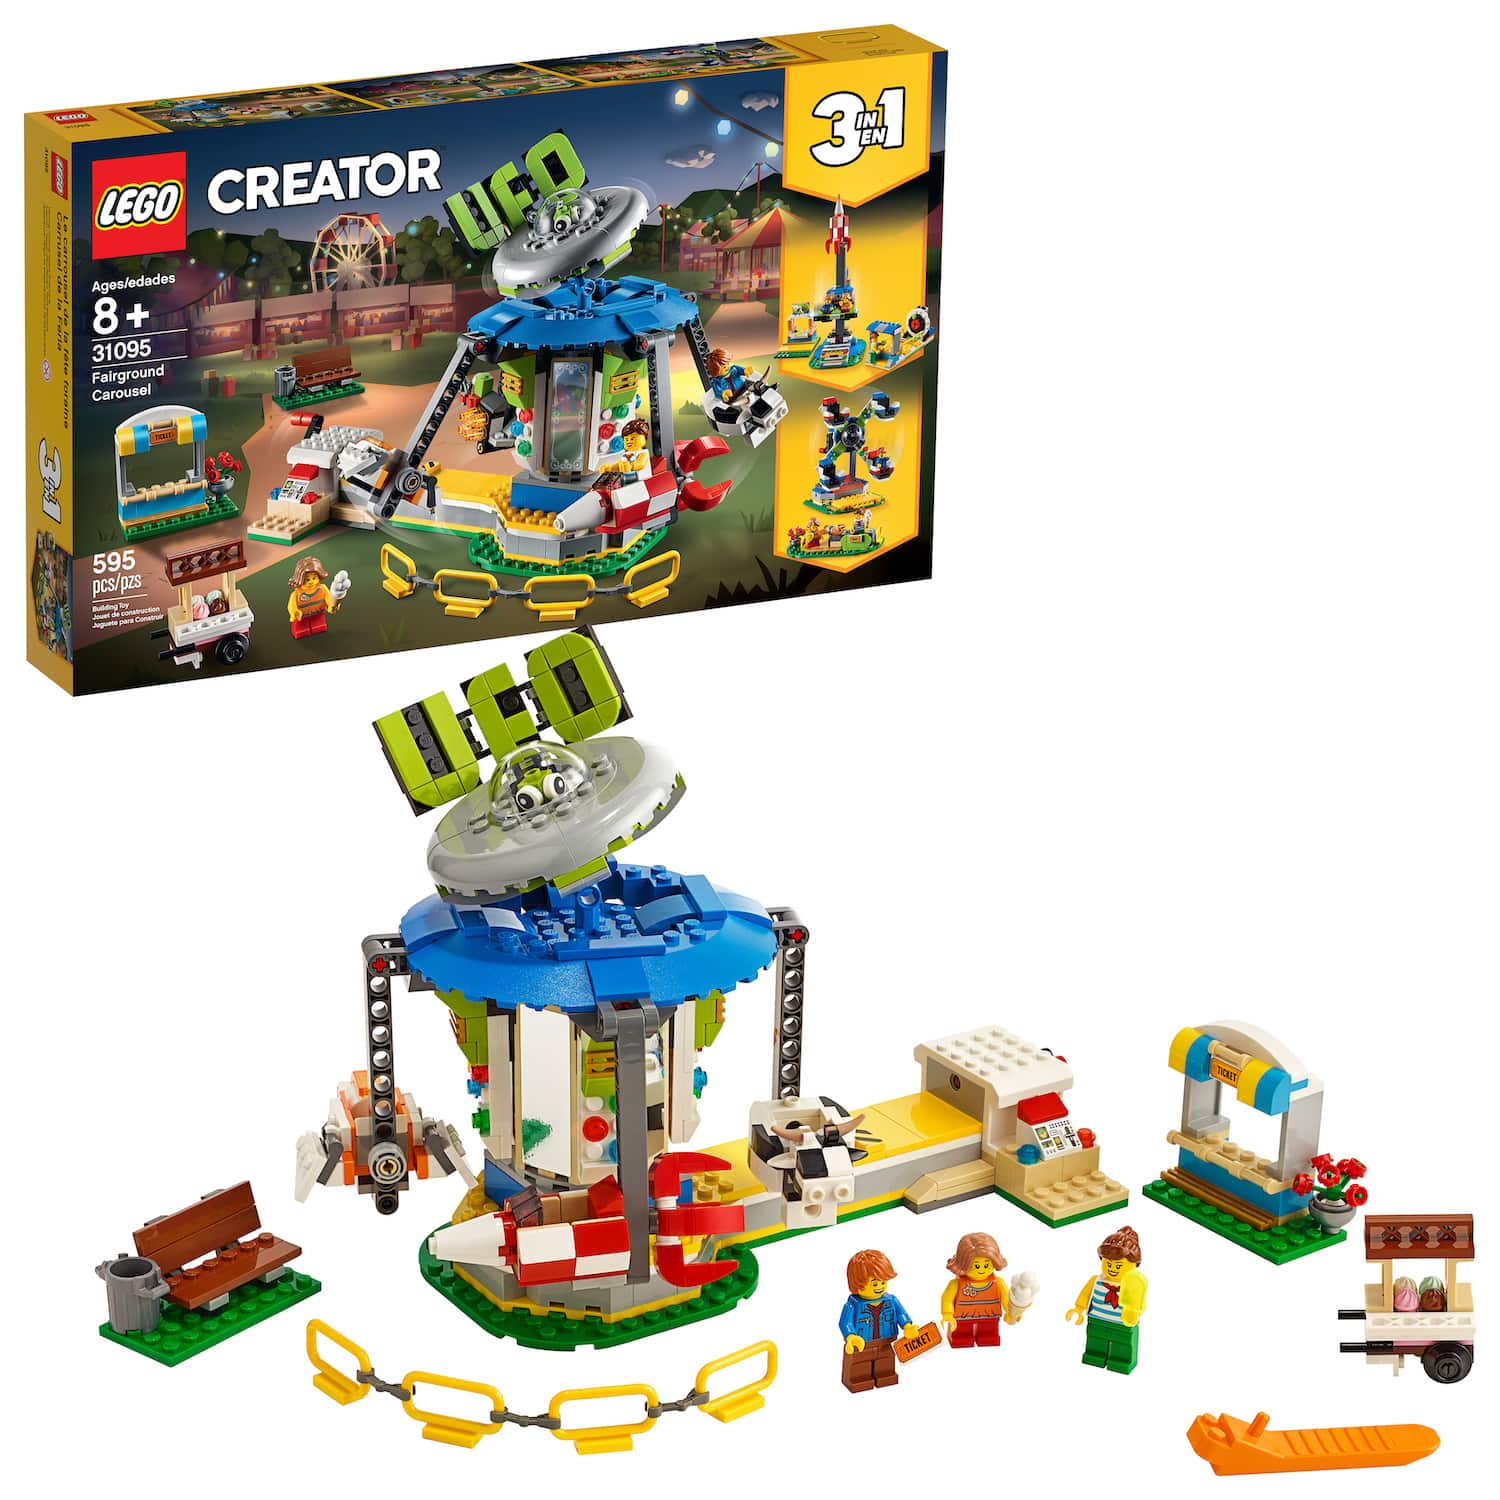 LEGO Creator Fairground Carousel 31095 Space-Themed Building Kit (595 Pieces) - image 1 of 8